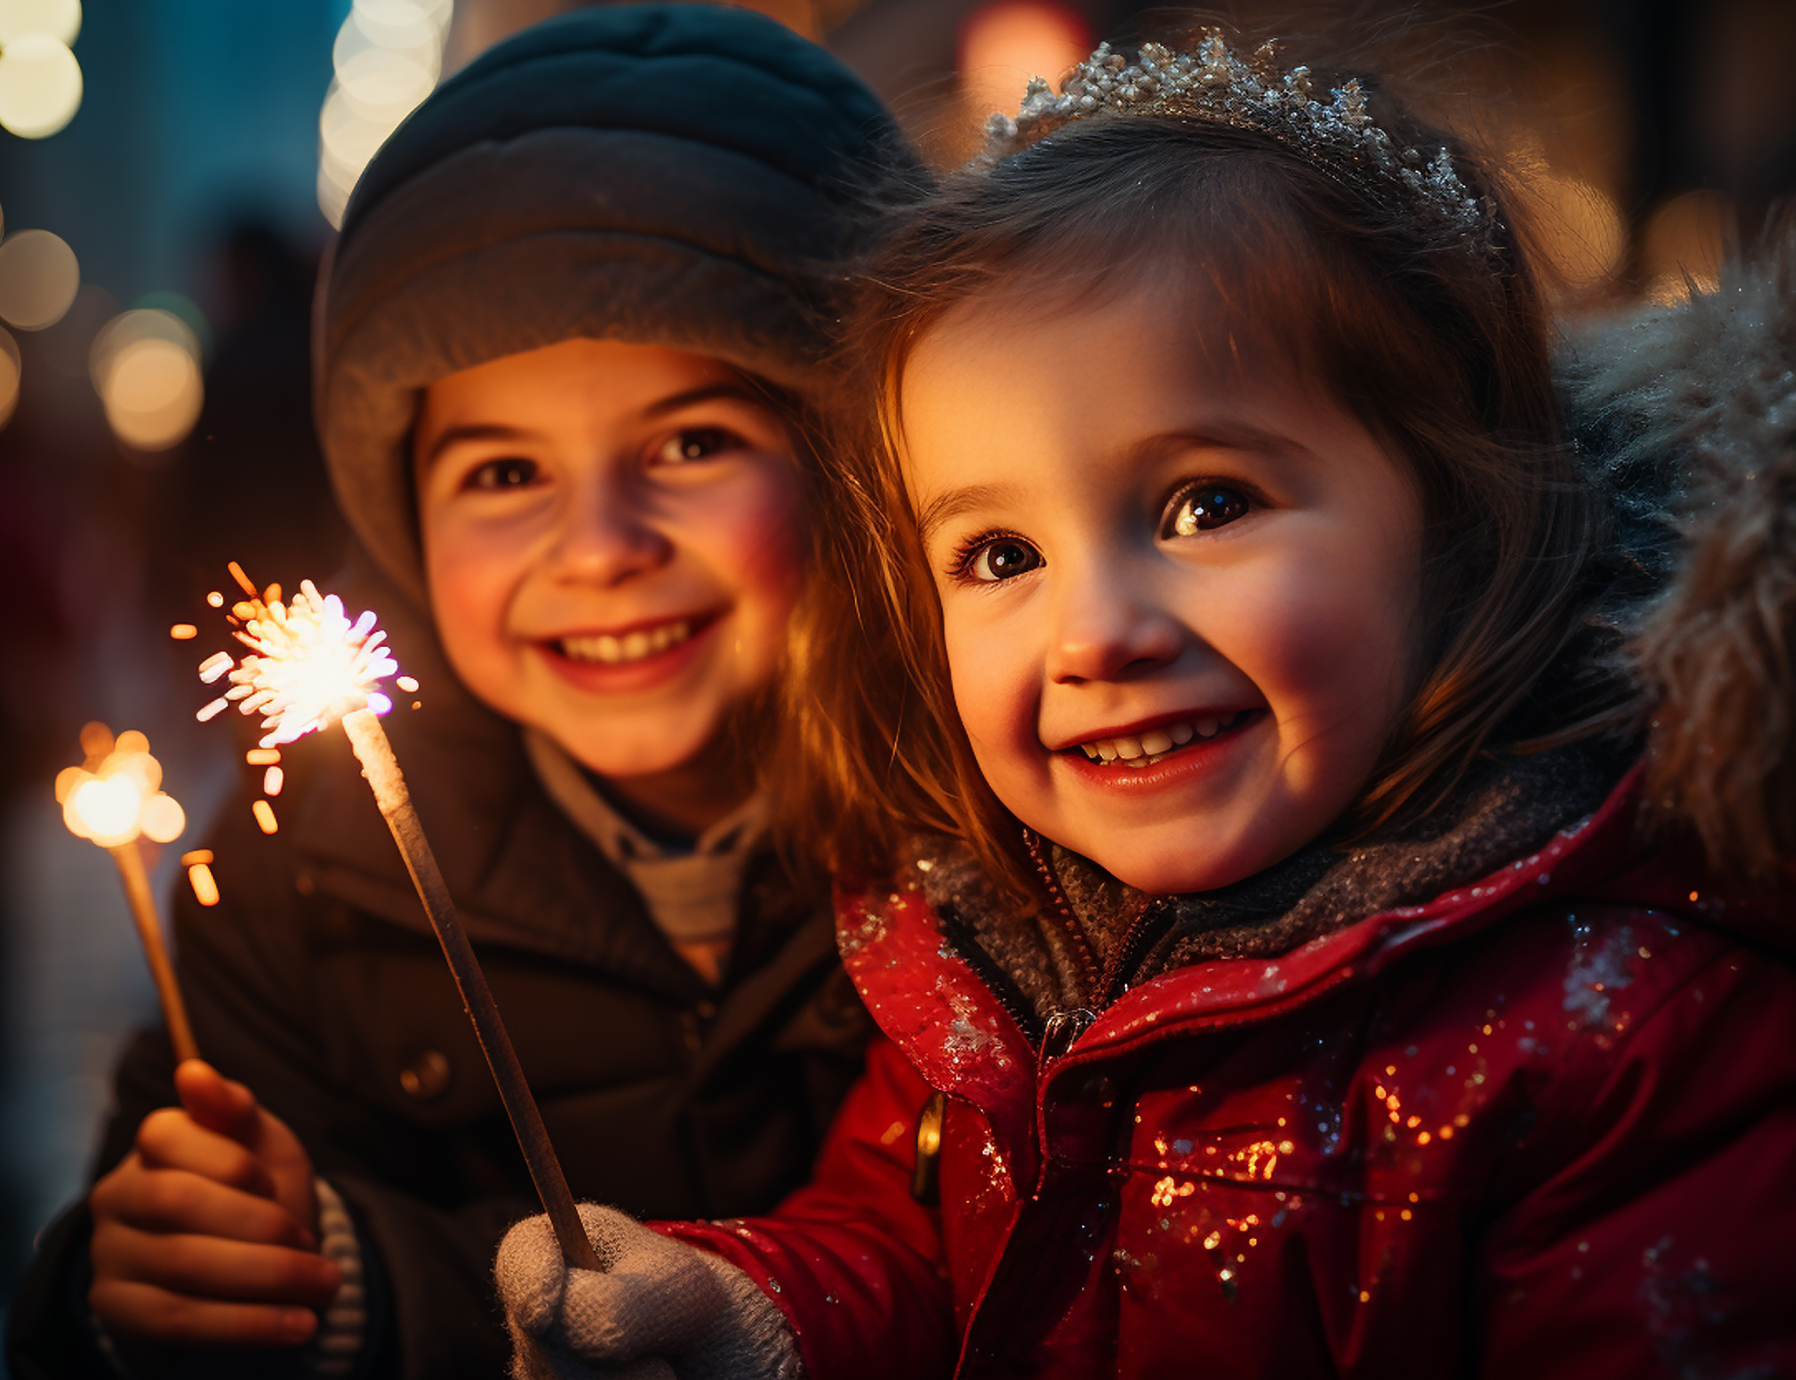 children-with-fireworks-stick-holiday-dynamic-postcard-happy-children-holding-lighted-fireworks 1